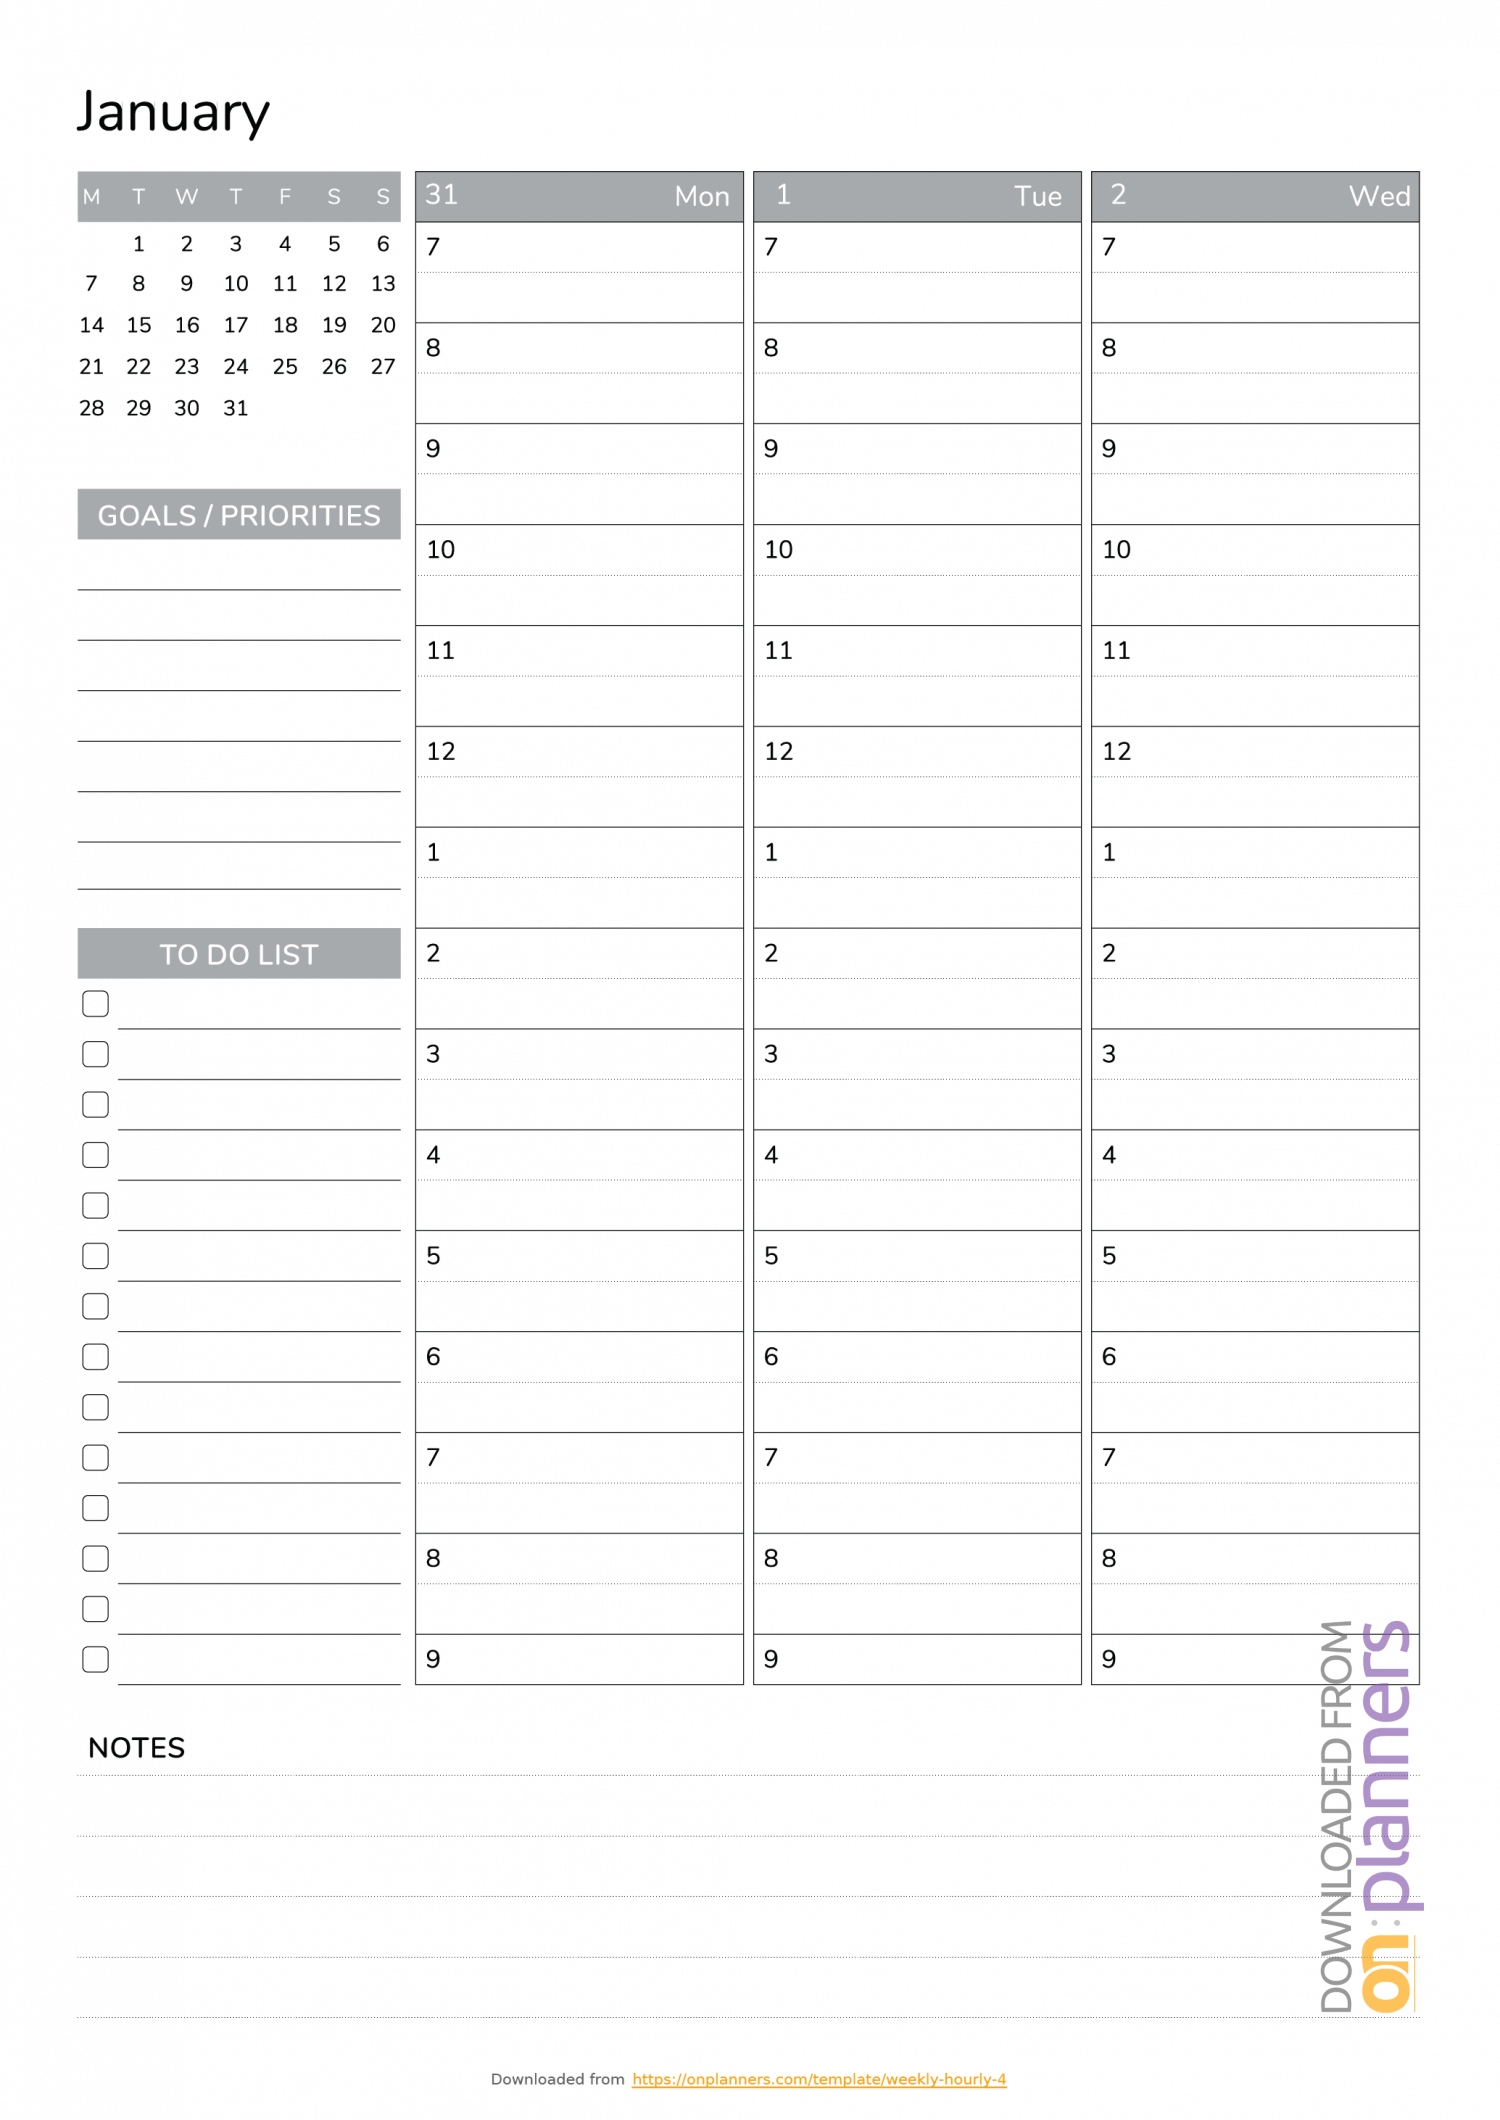 The Best Weekly Schedule Templates. Organize Your Time Free 8 Week Calendar Template